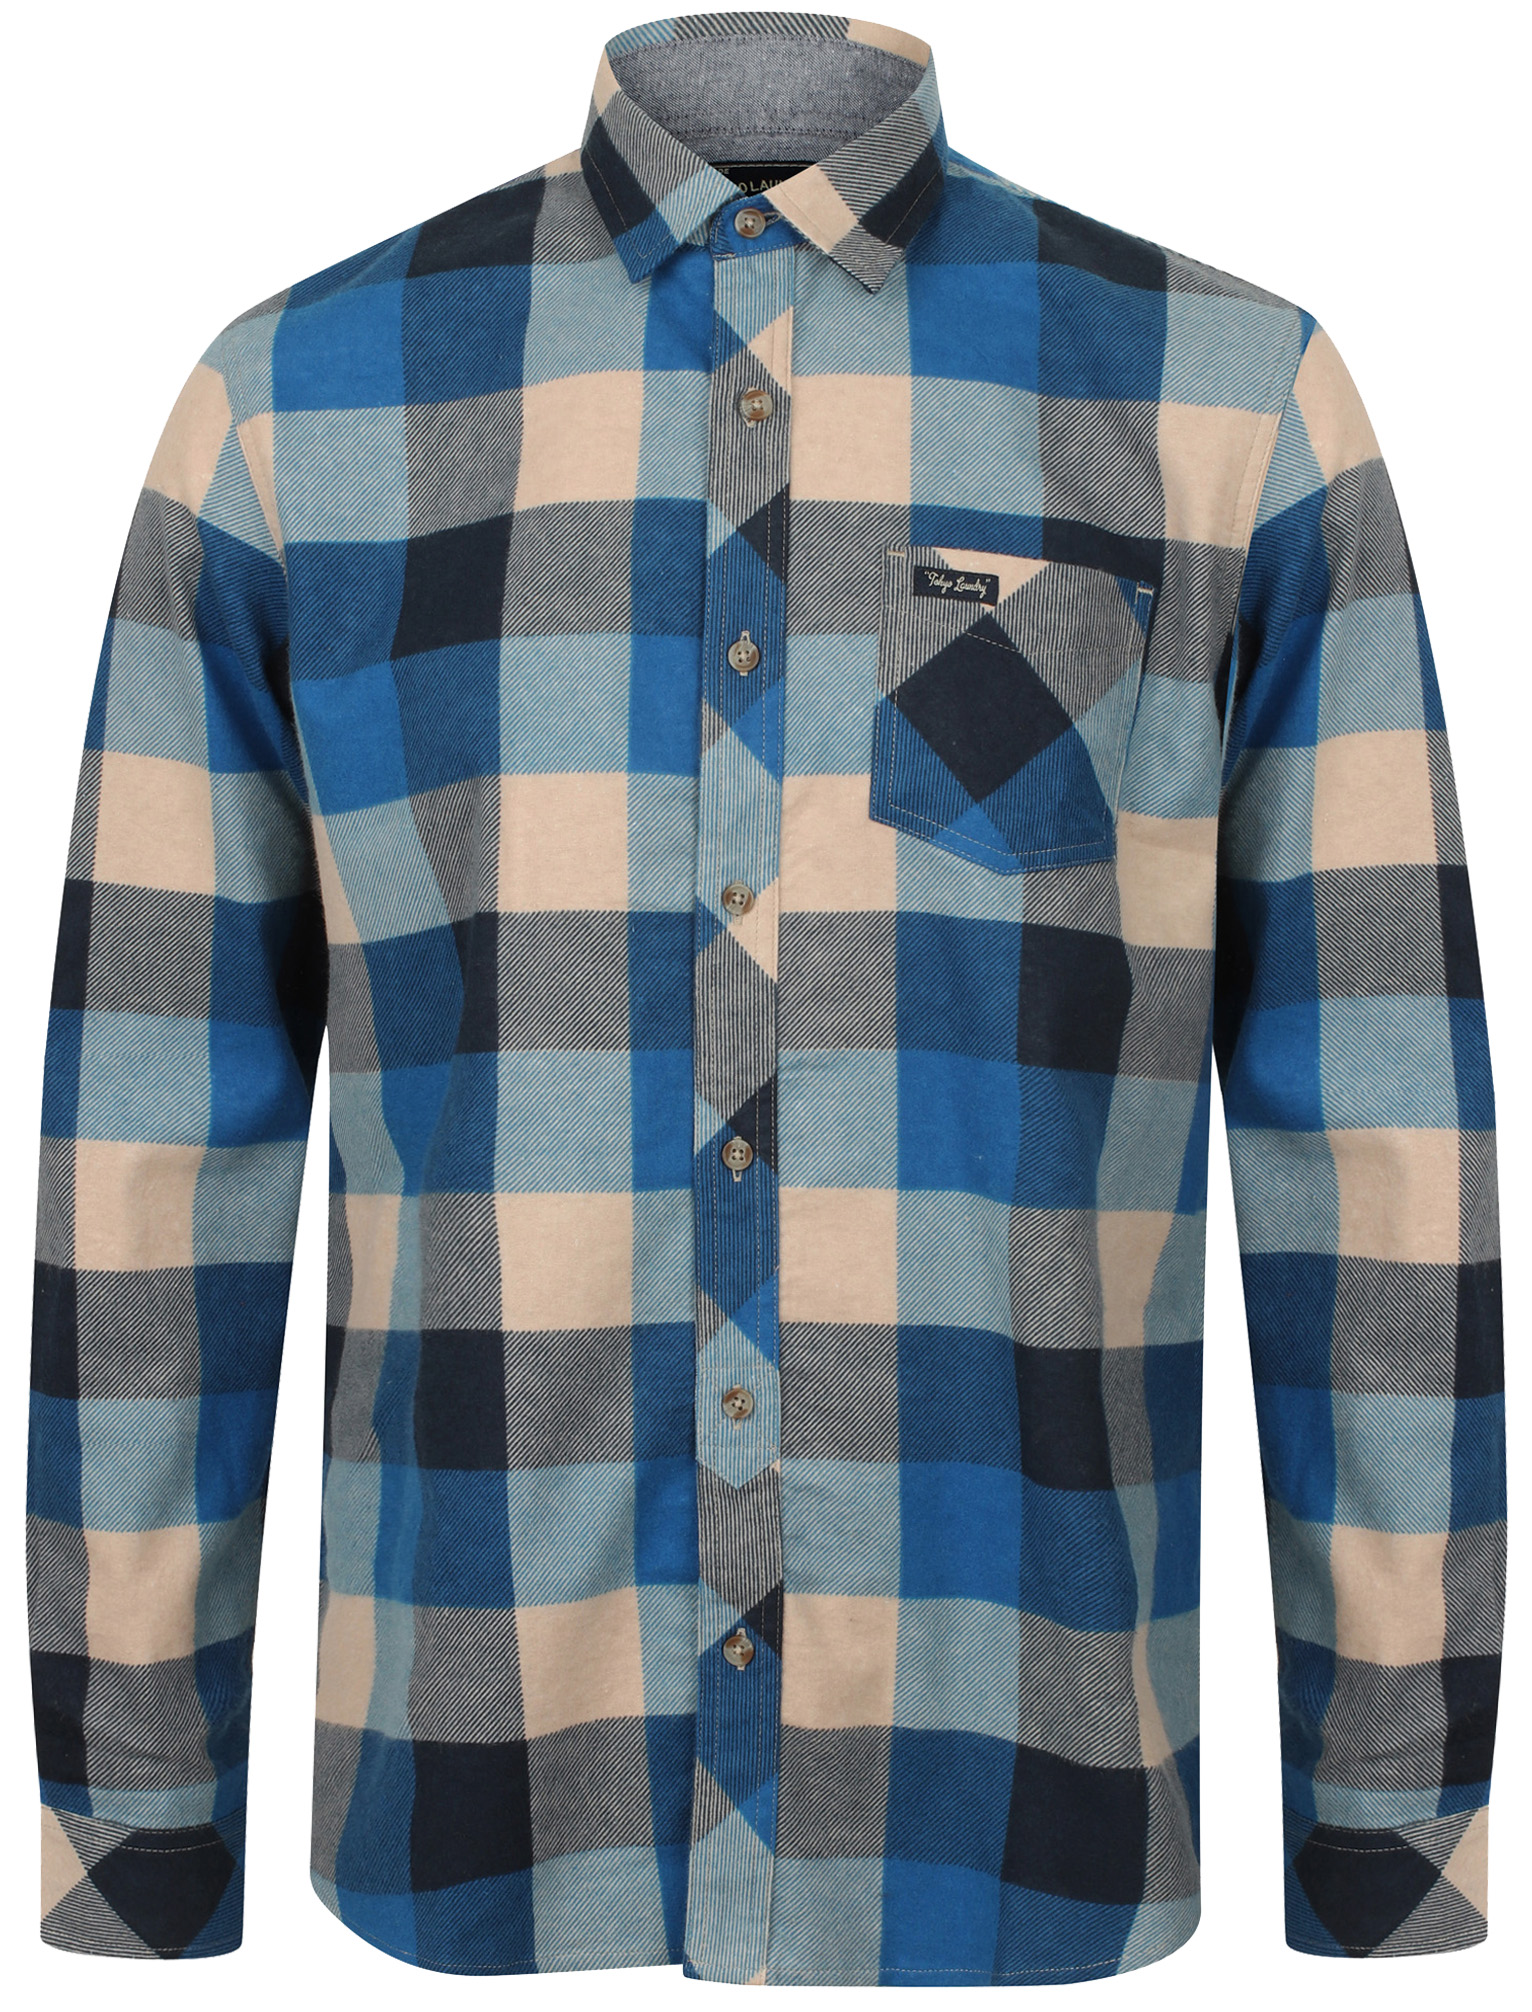 Mens Tokyo Laundry Napoli Brushed Flannel Checked Long Sleeve Shirt Size S-XXL